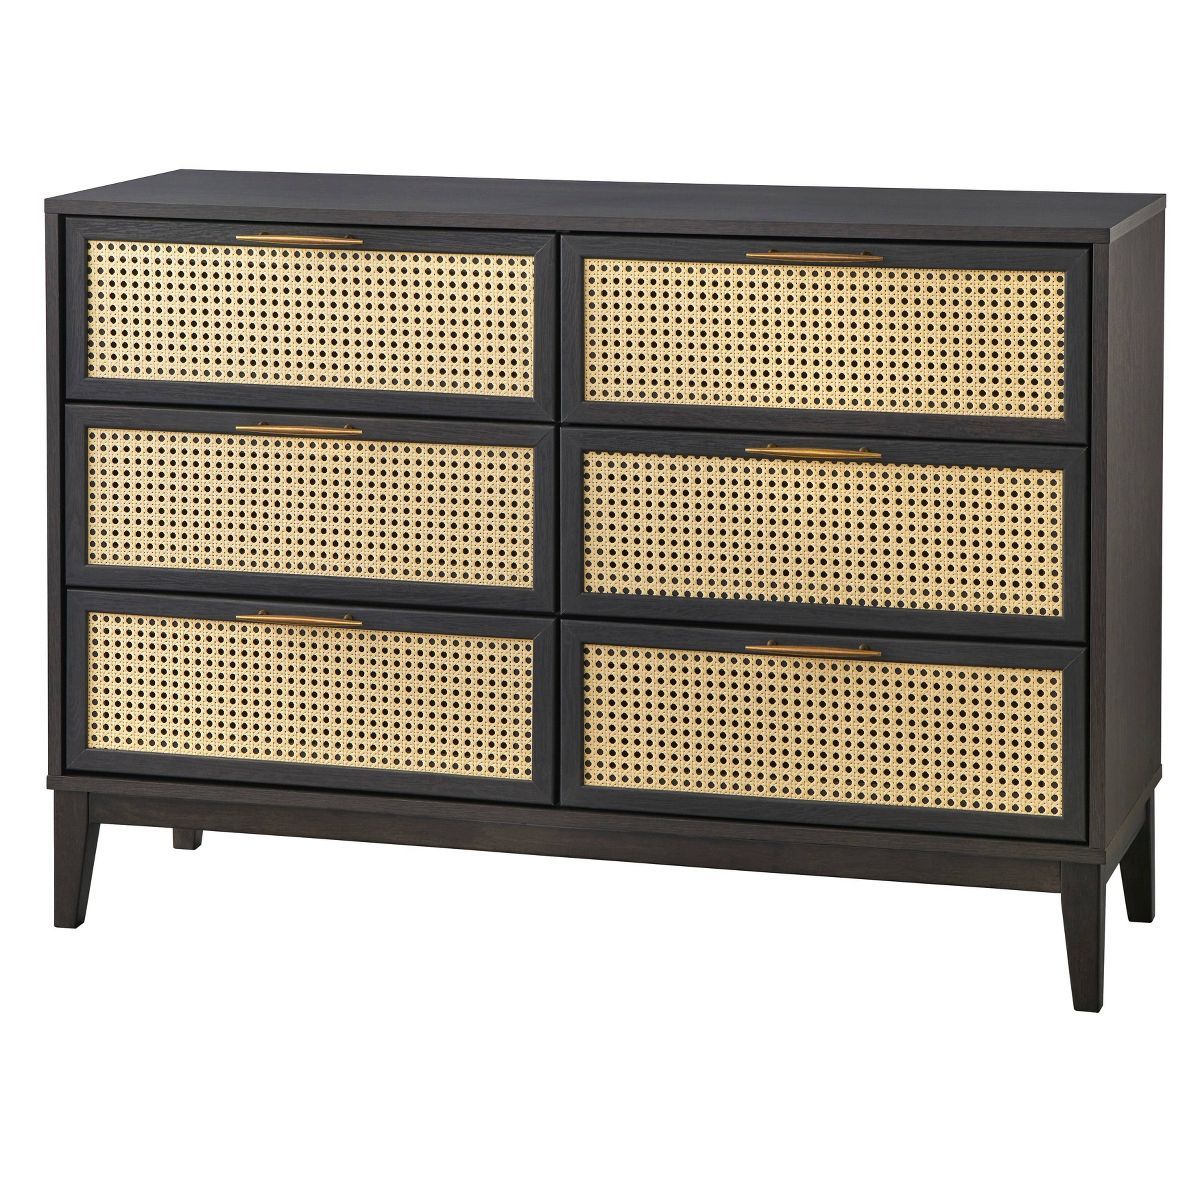 Andros 6 Drawer Dresser with Faux Cane Drawer Fronts - Buylateral | Target